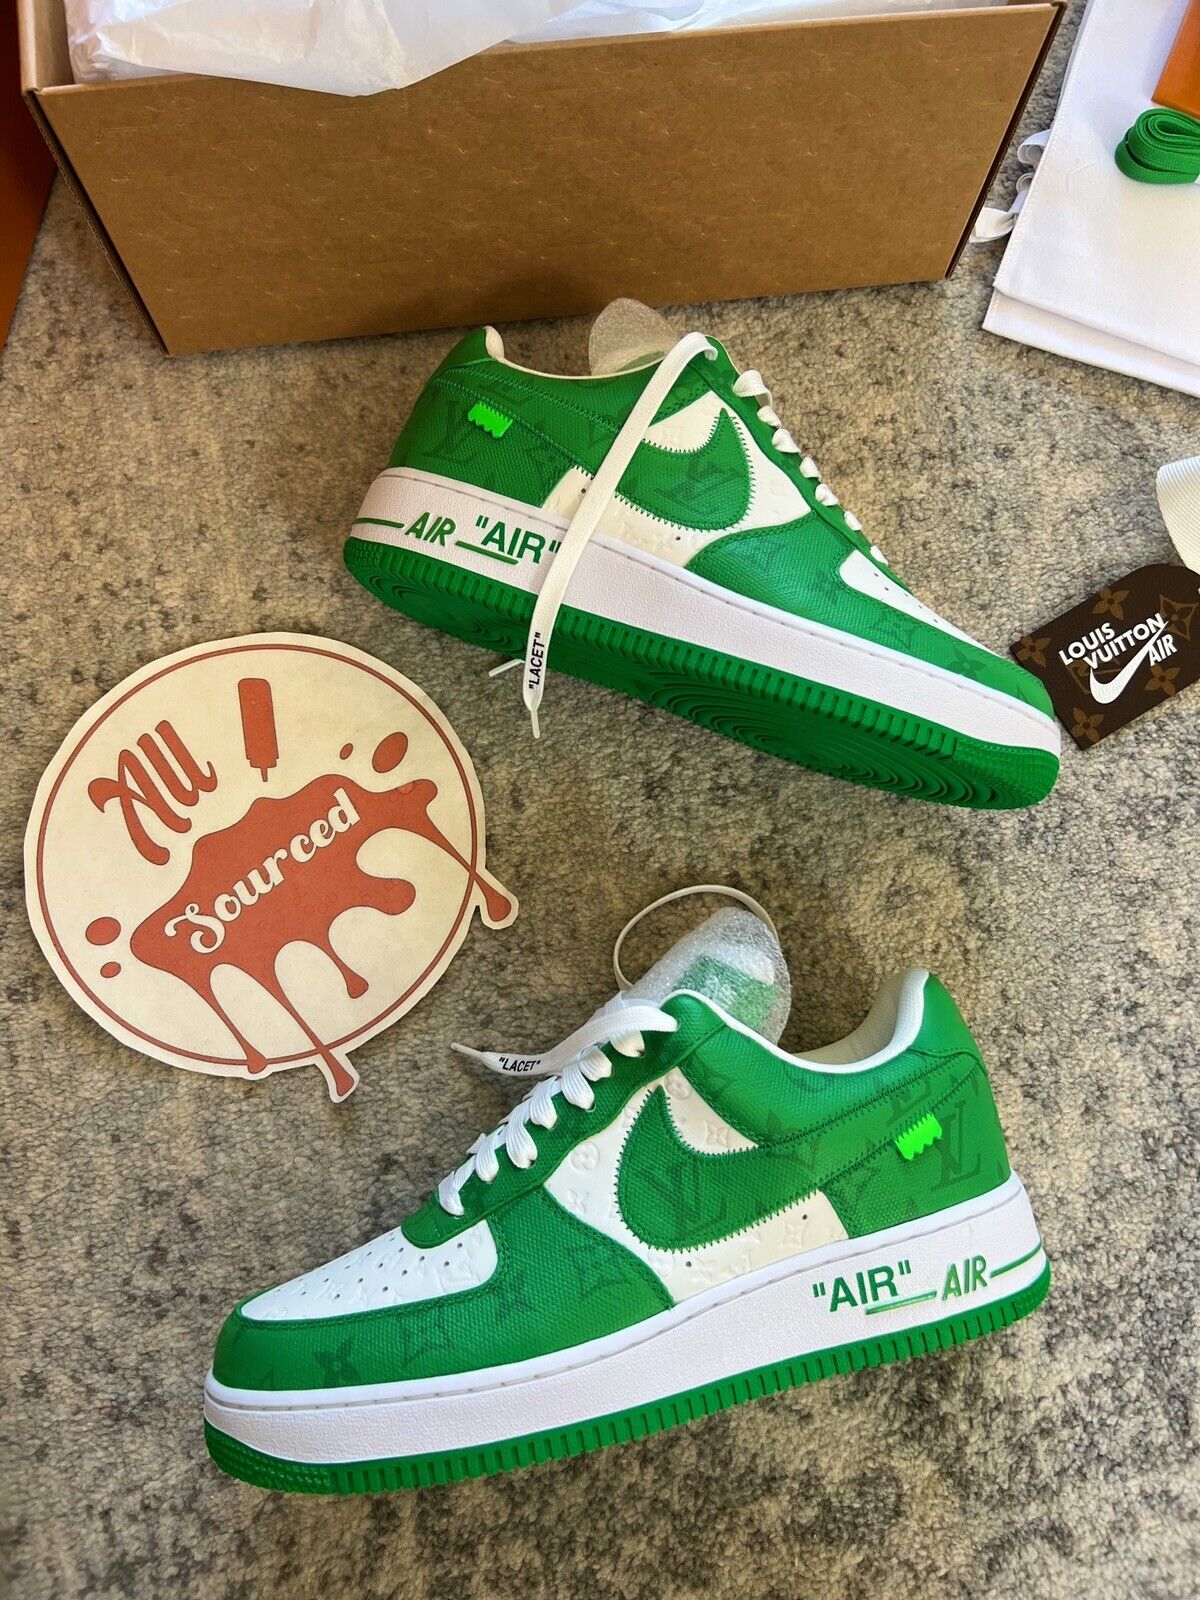 Louis Vuitton x Nike Air Force 1 Green size UK 8 (US 9) BRAND NEW